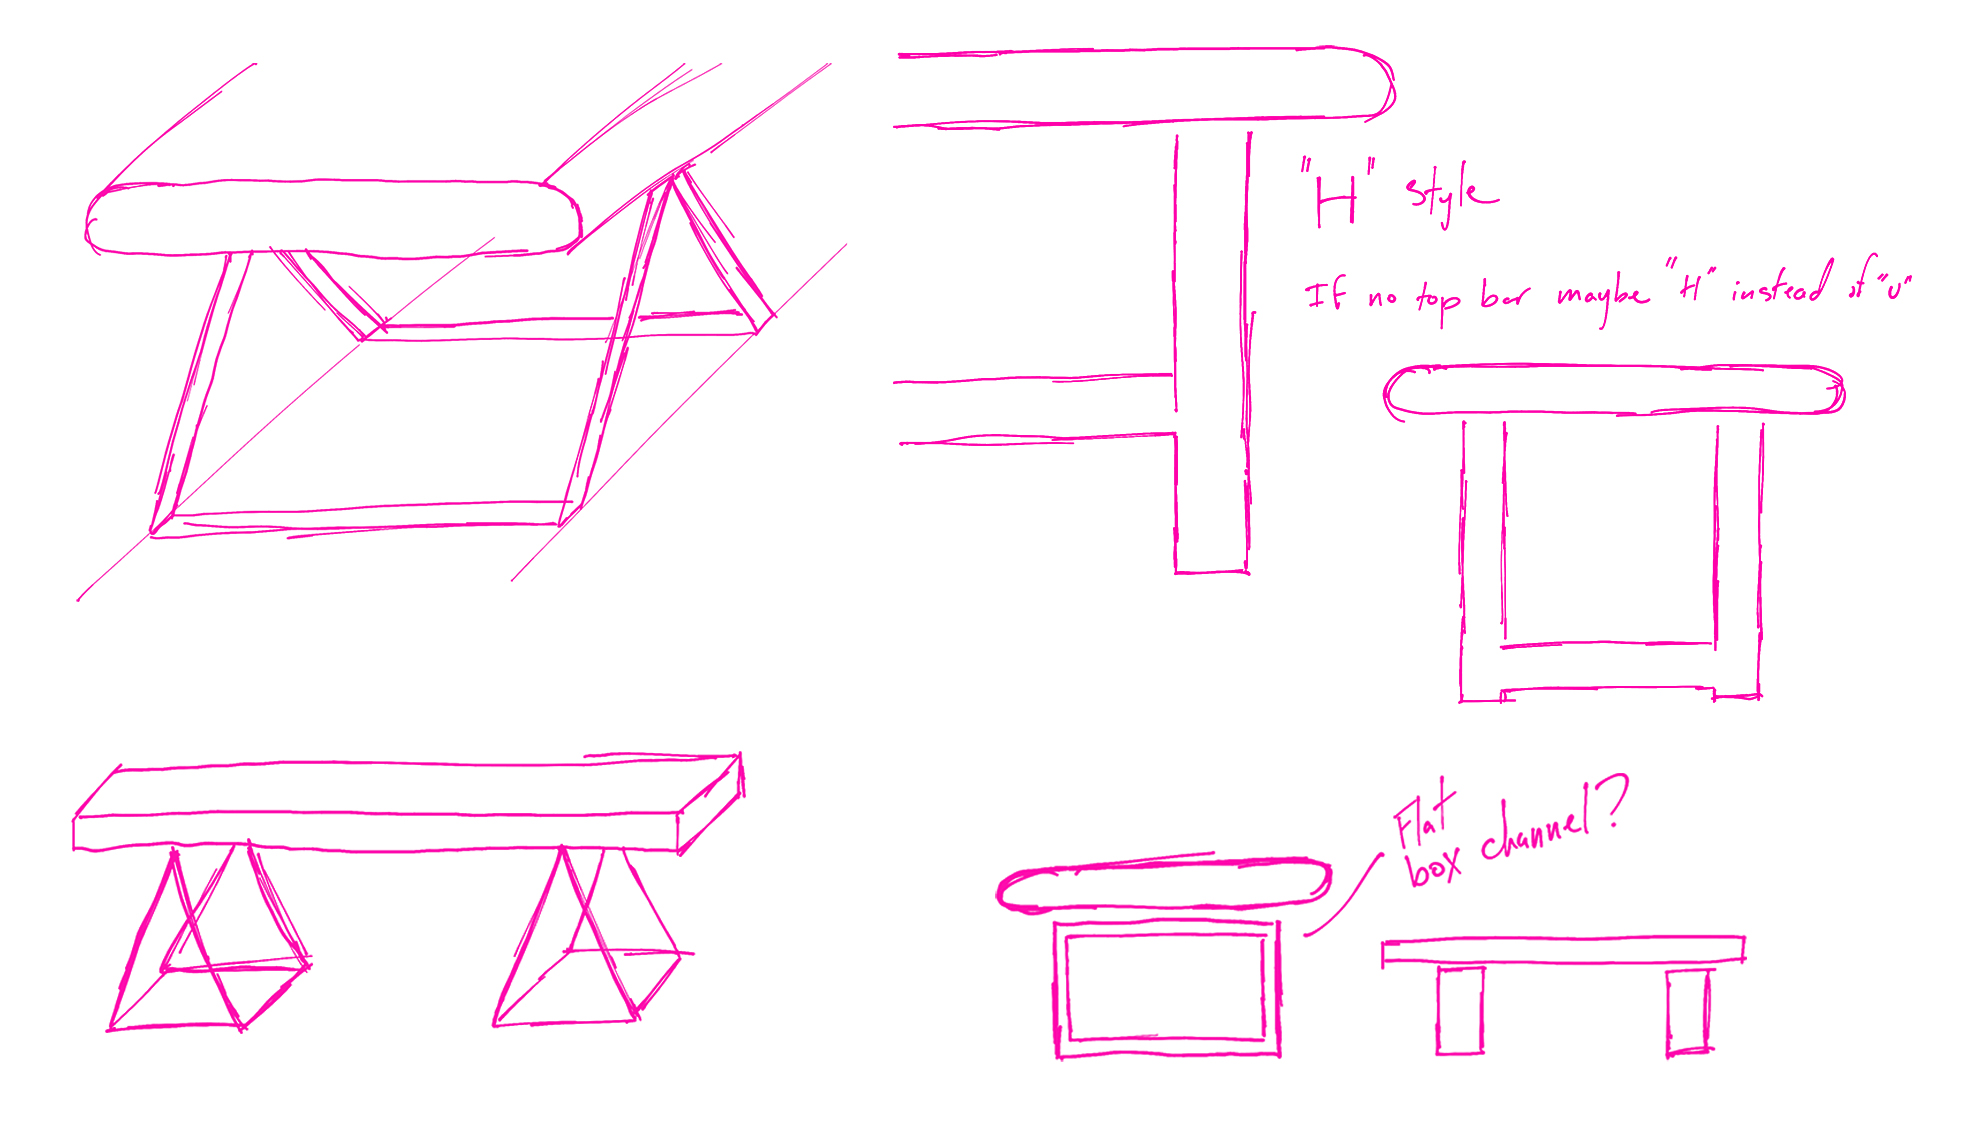 Sketches of Leg shapes and configurations